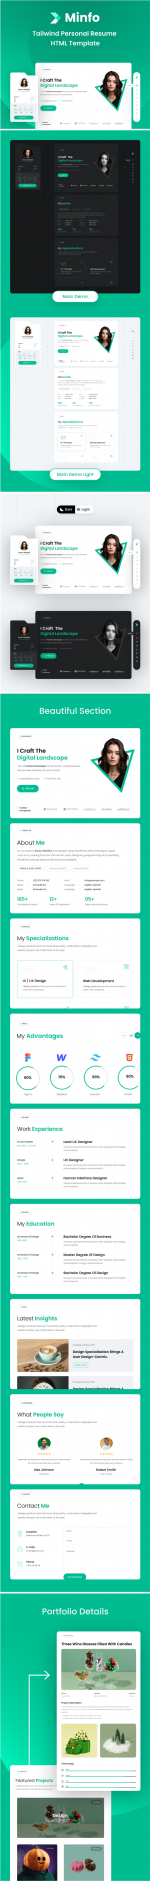 Screenshot 2024-04-05 at 15-37-06 Minfo - Tailwind Personal Resume HTML Template.png